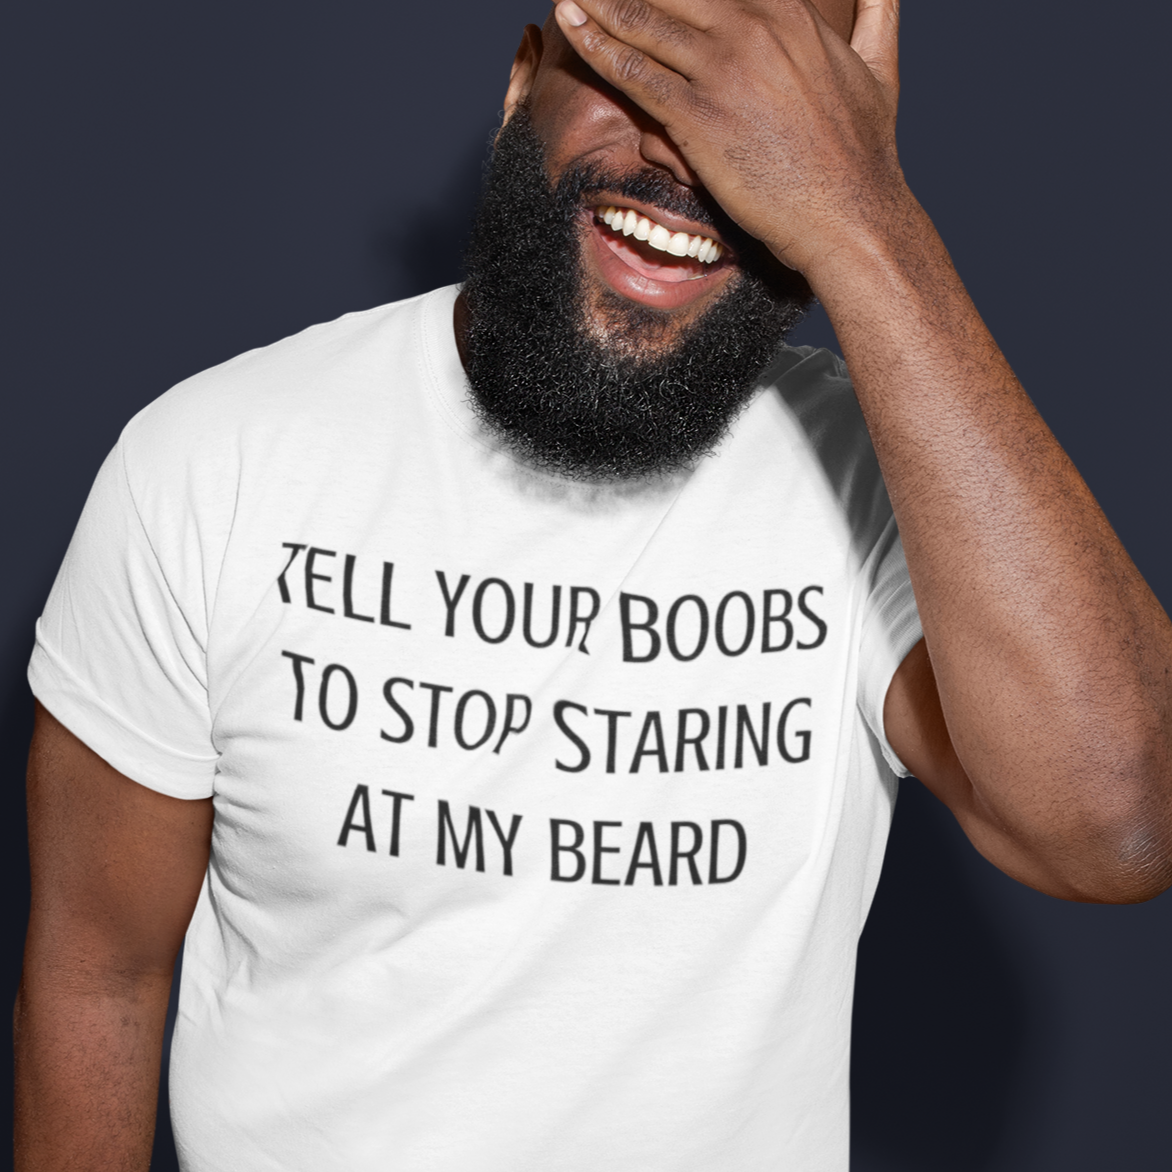 tell-your-boobs-to-stop-staring-at-my-beard-white-t-shirt-mens-funny-mockup-of-a-man-with-beard-laughing-while-covering-his-face